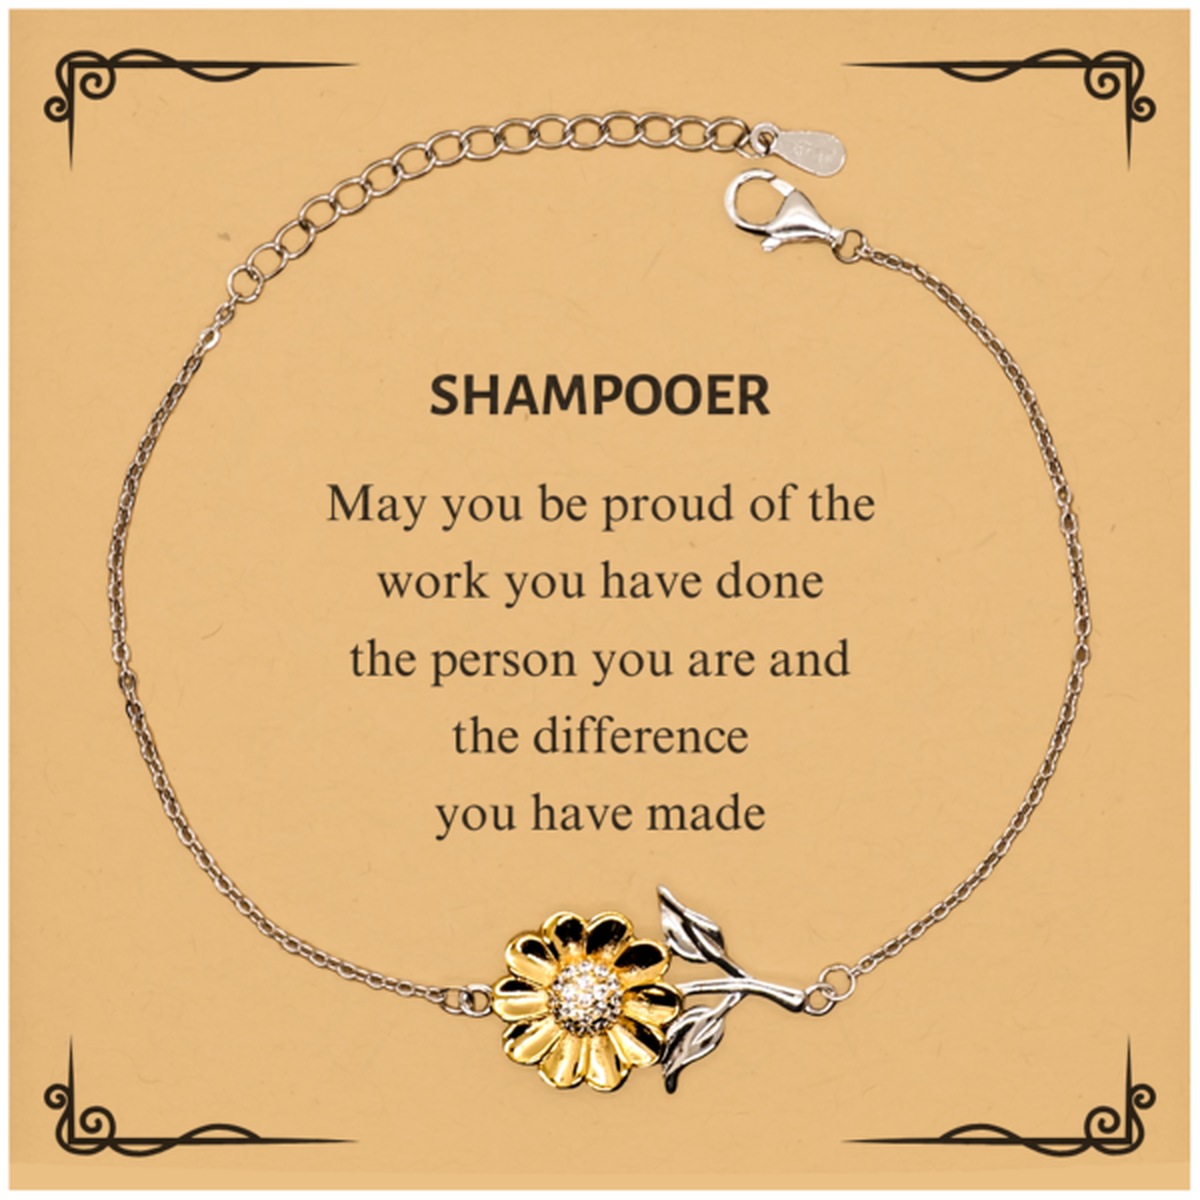 Shampooer May you be proud of the work you have done, Retirement Shampooer Sunflower Bracelet for Colleague Appreciation Gifts Amazing for Shampooer